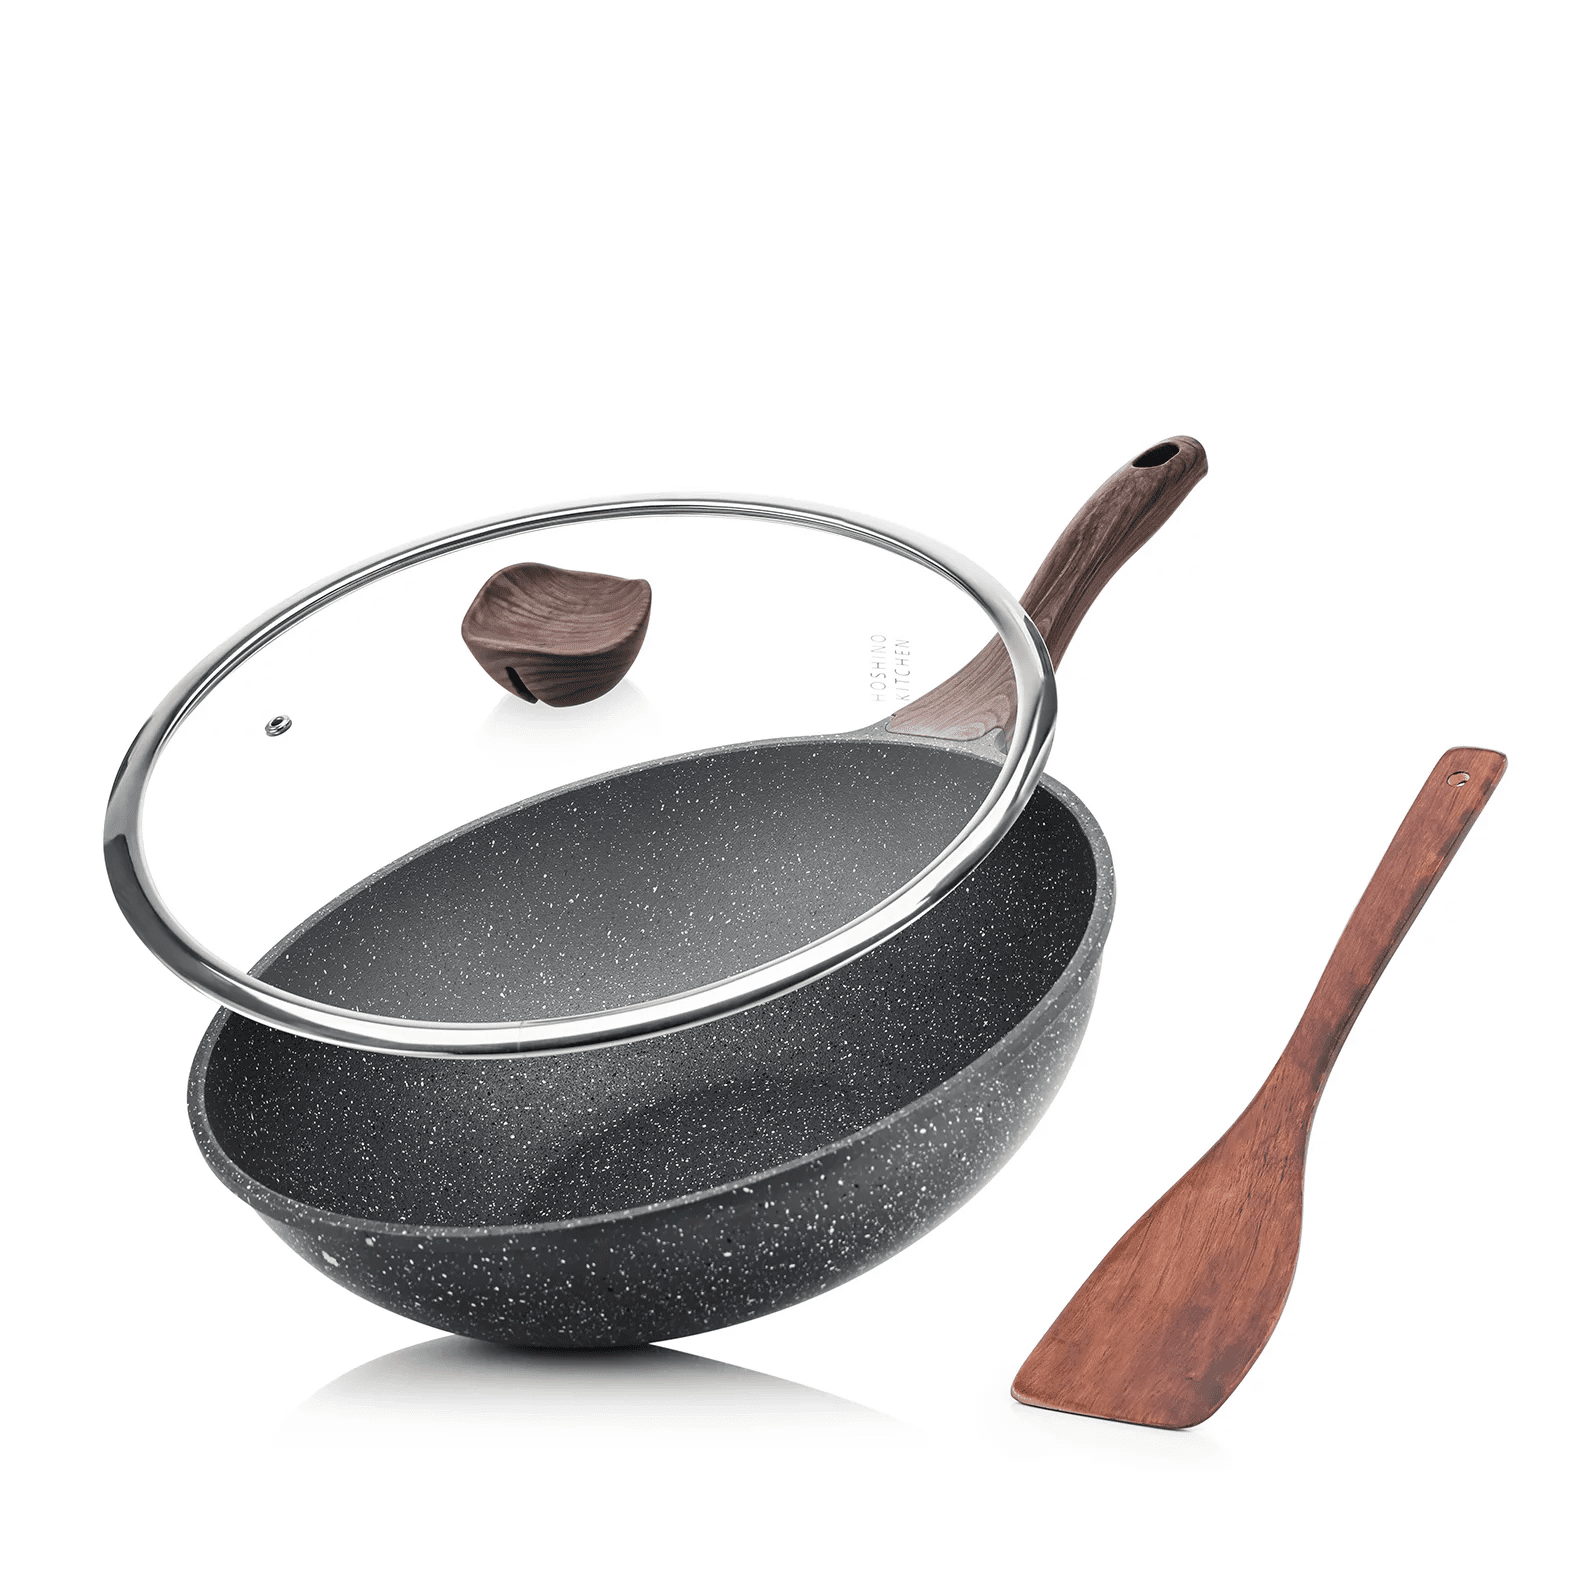 ANEDER Frying Pan with Lid Skillet Nonstick 10 inch / 12.5inch Carbon Steel  Wok Pan with Lid & Wood Spatula